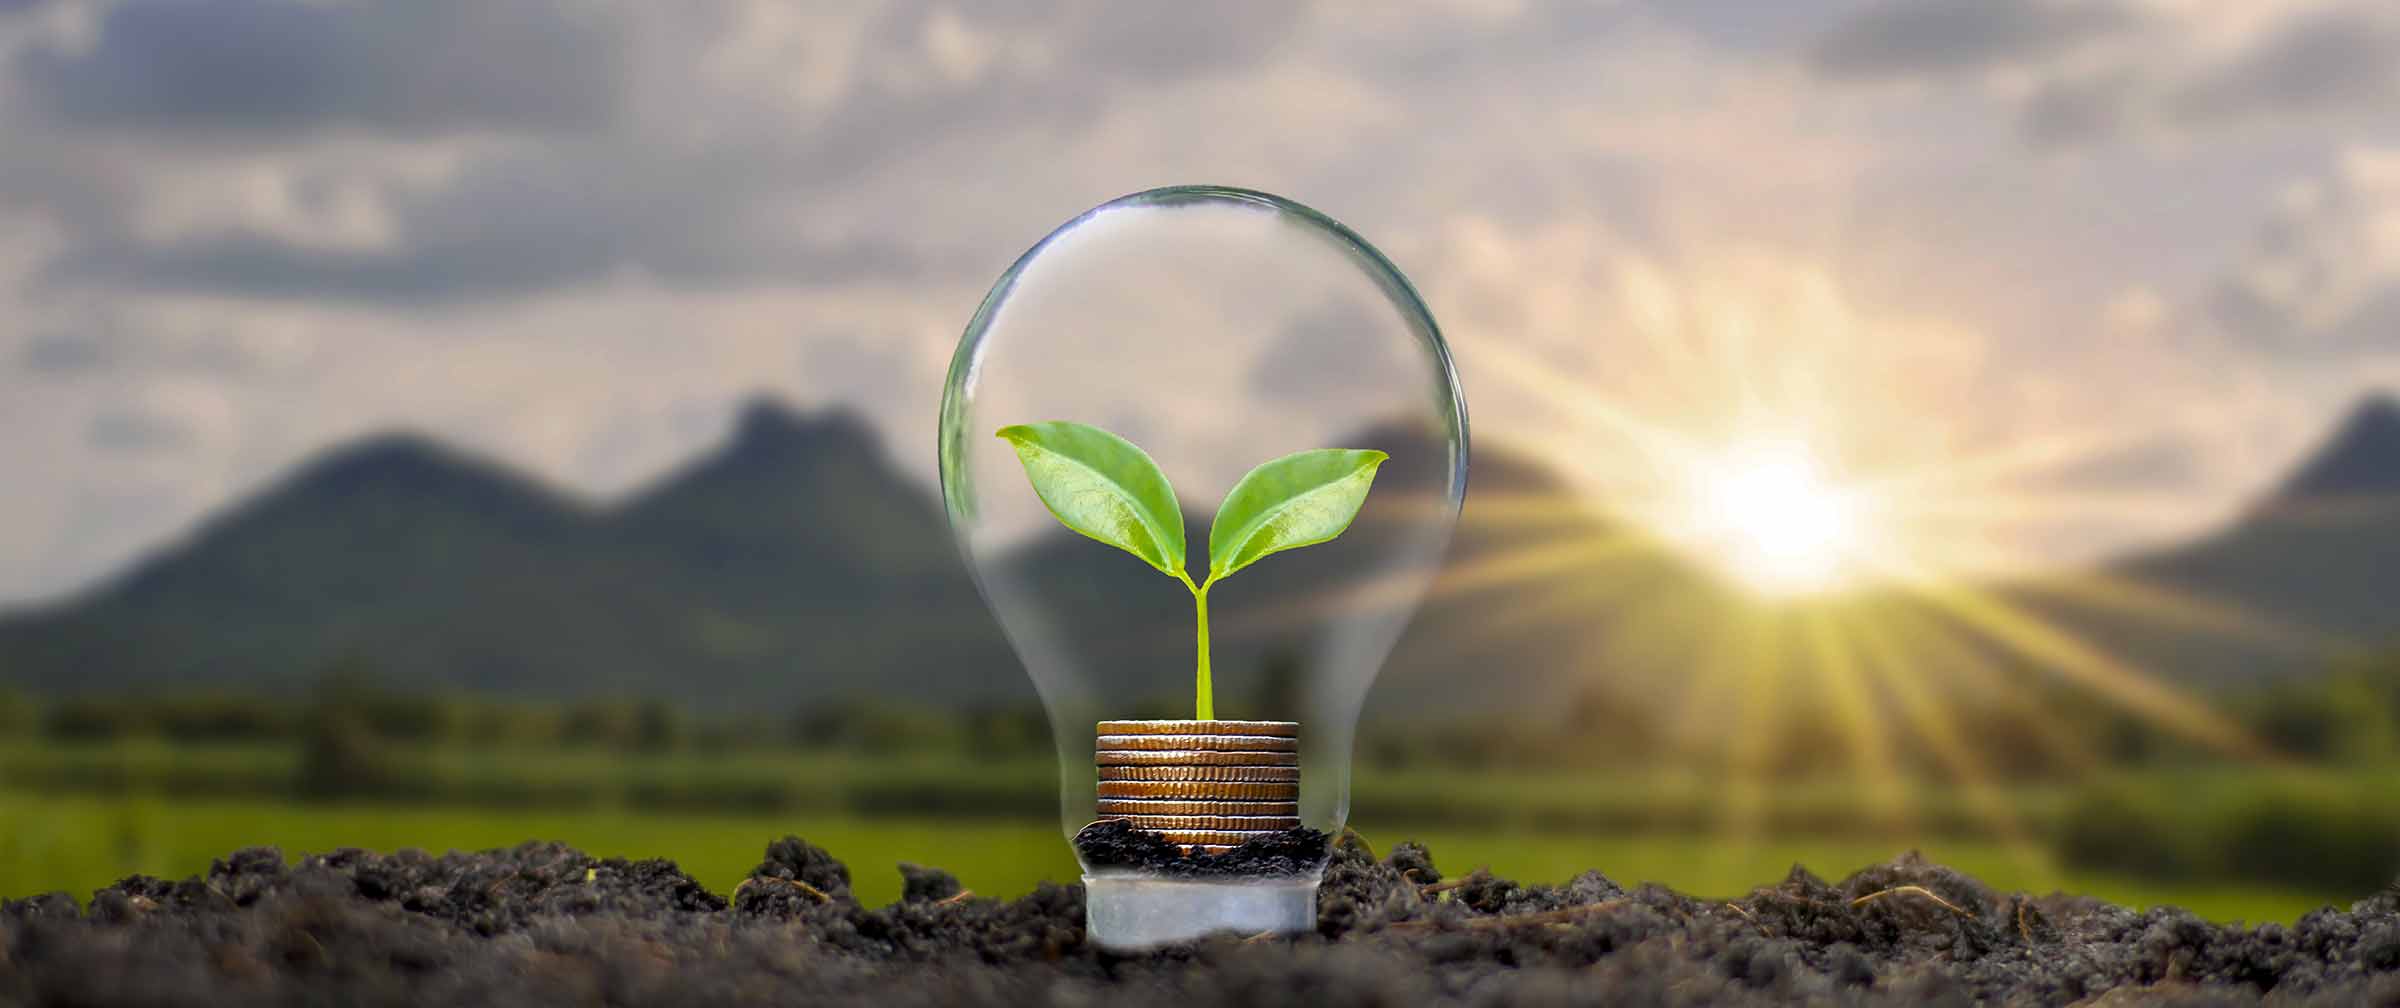 Image of a lightbulb with a seedling growing with a mountainous background